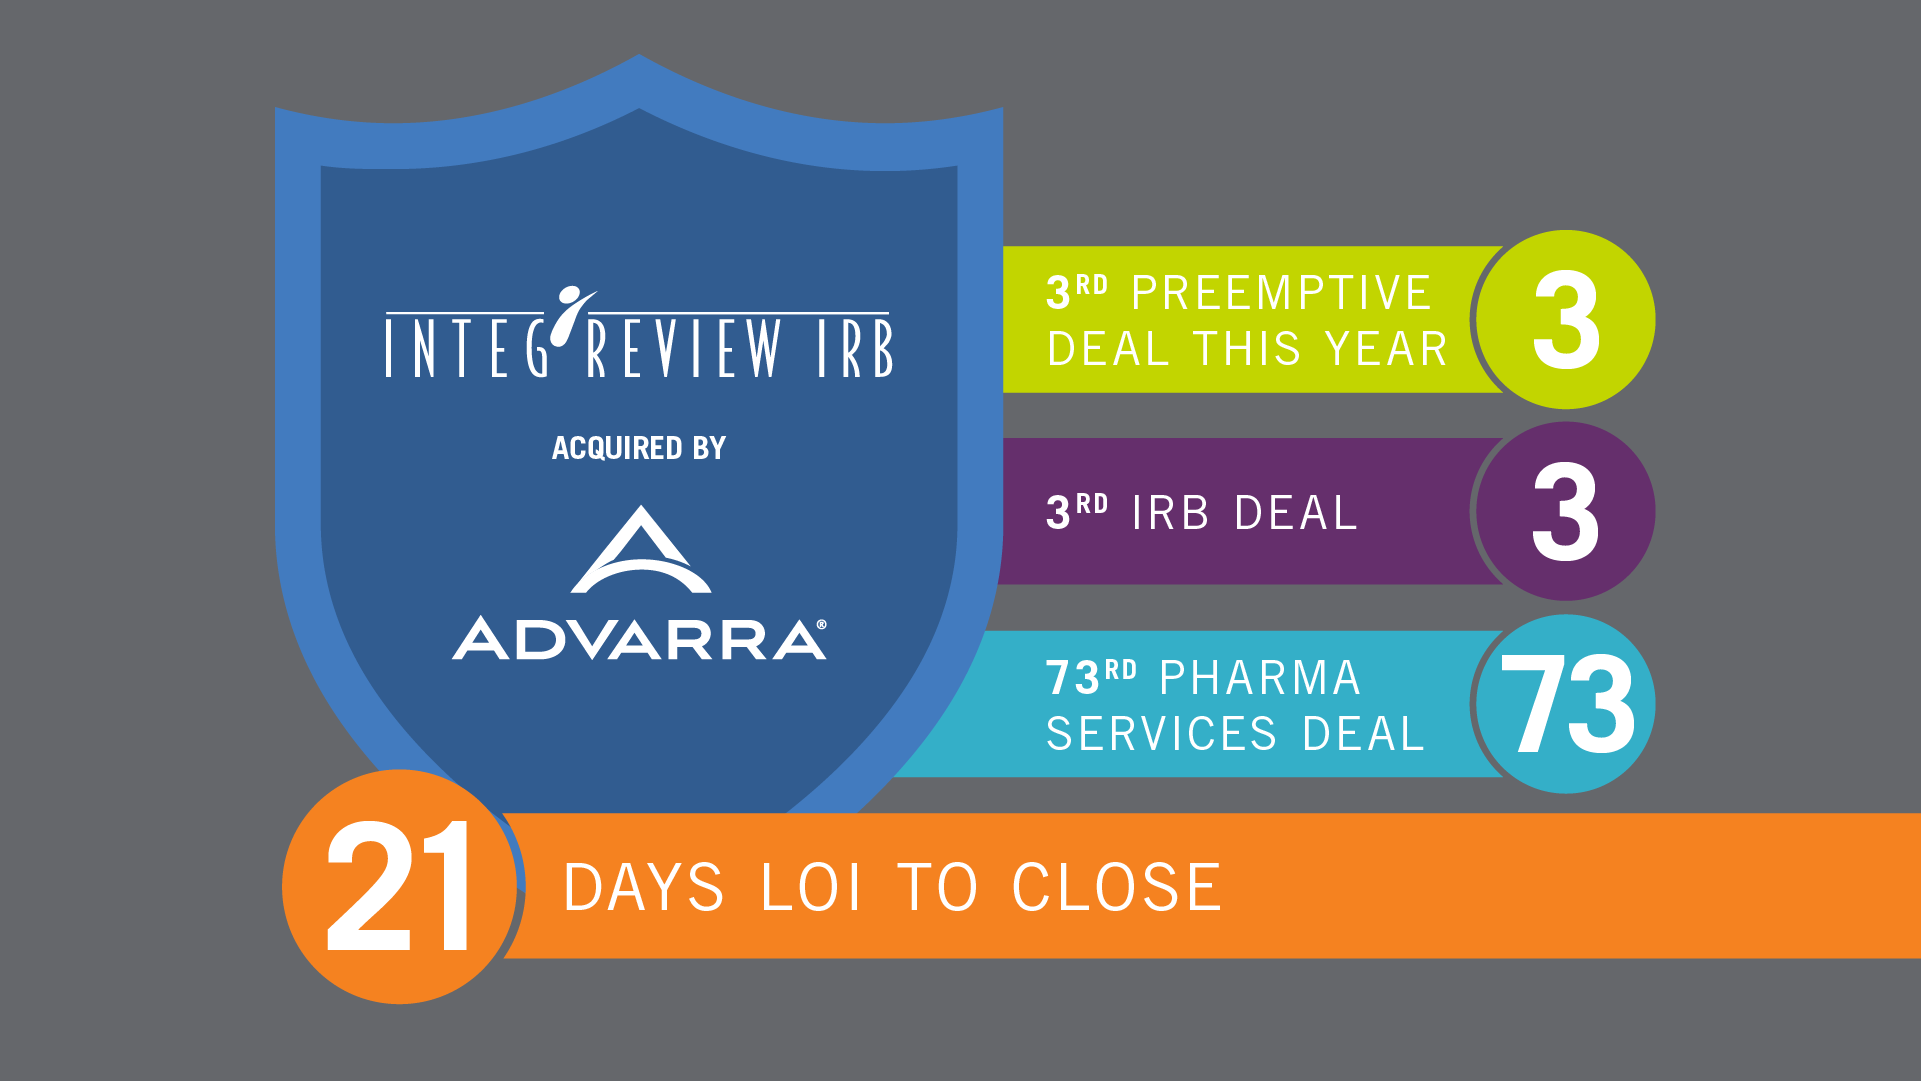 IntegReview was acquired by Advarra